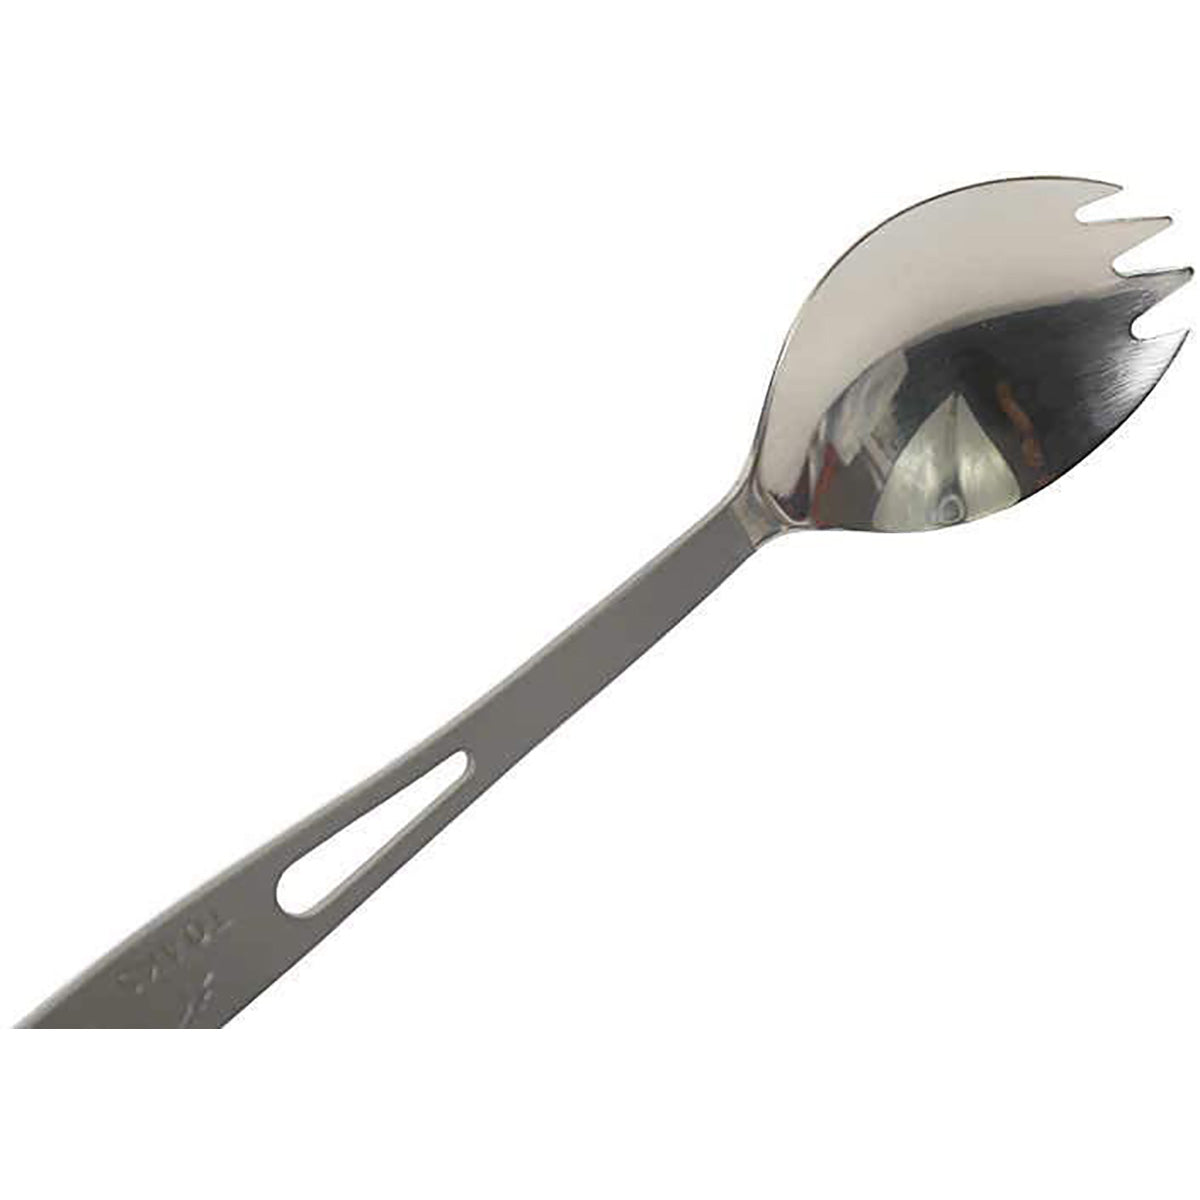 TOAKS Polished Head Titanium Camping Spork with Matte Finish Handle TOAKS